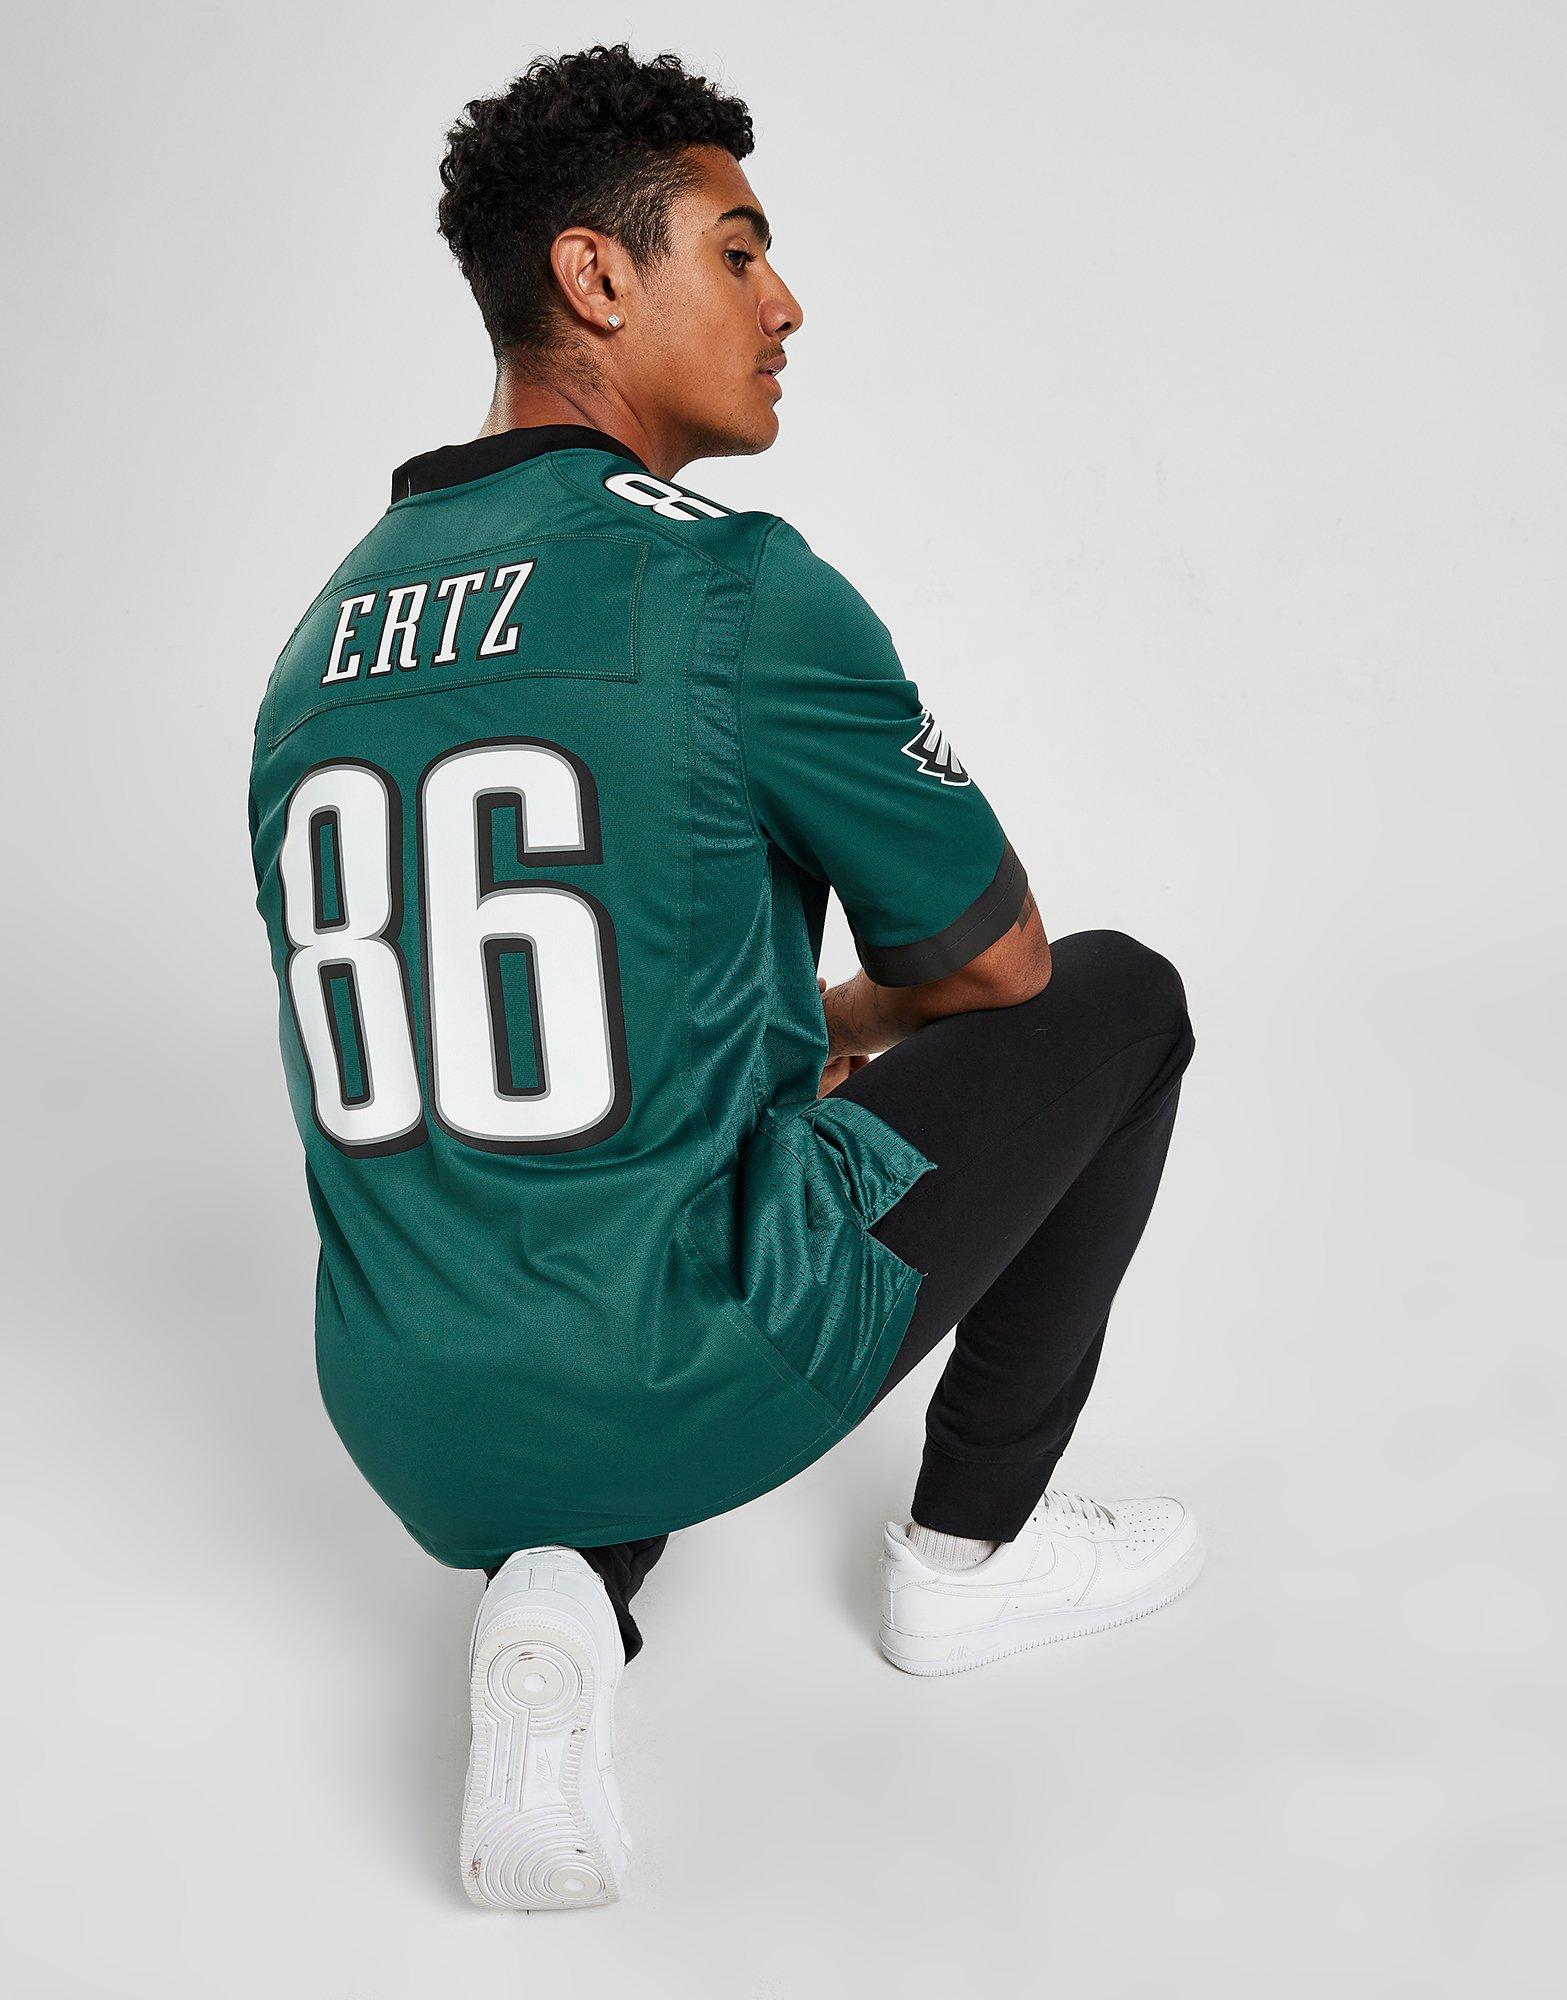 eagles 92 jersey